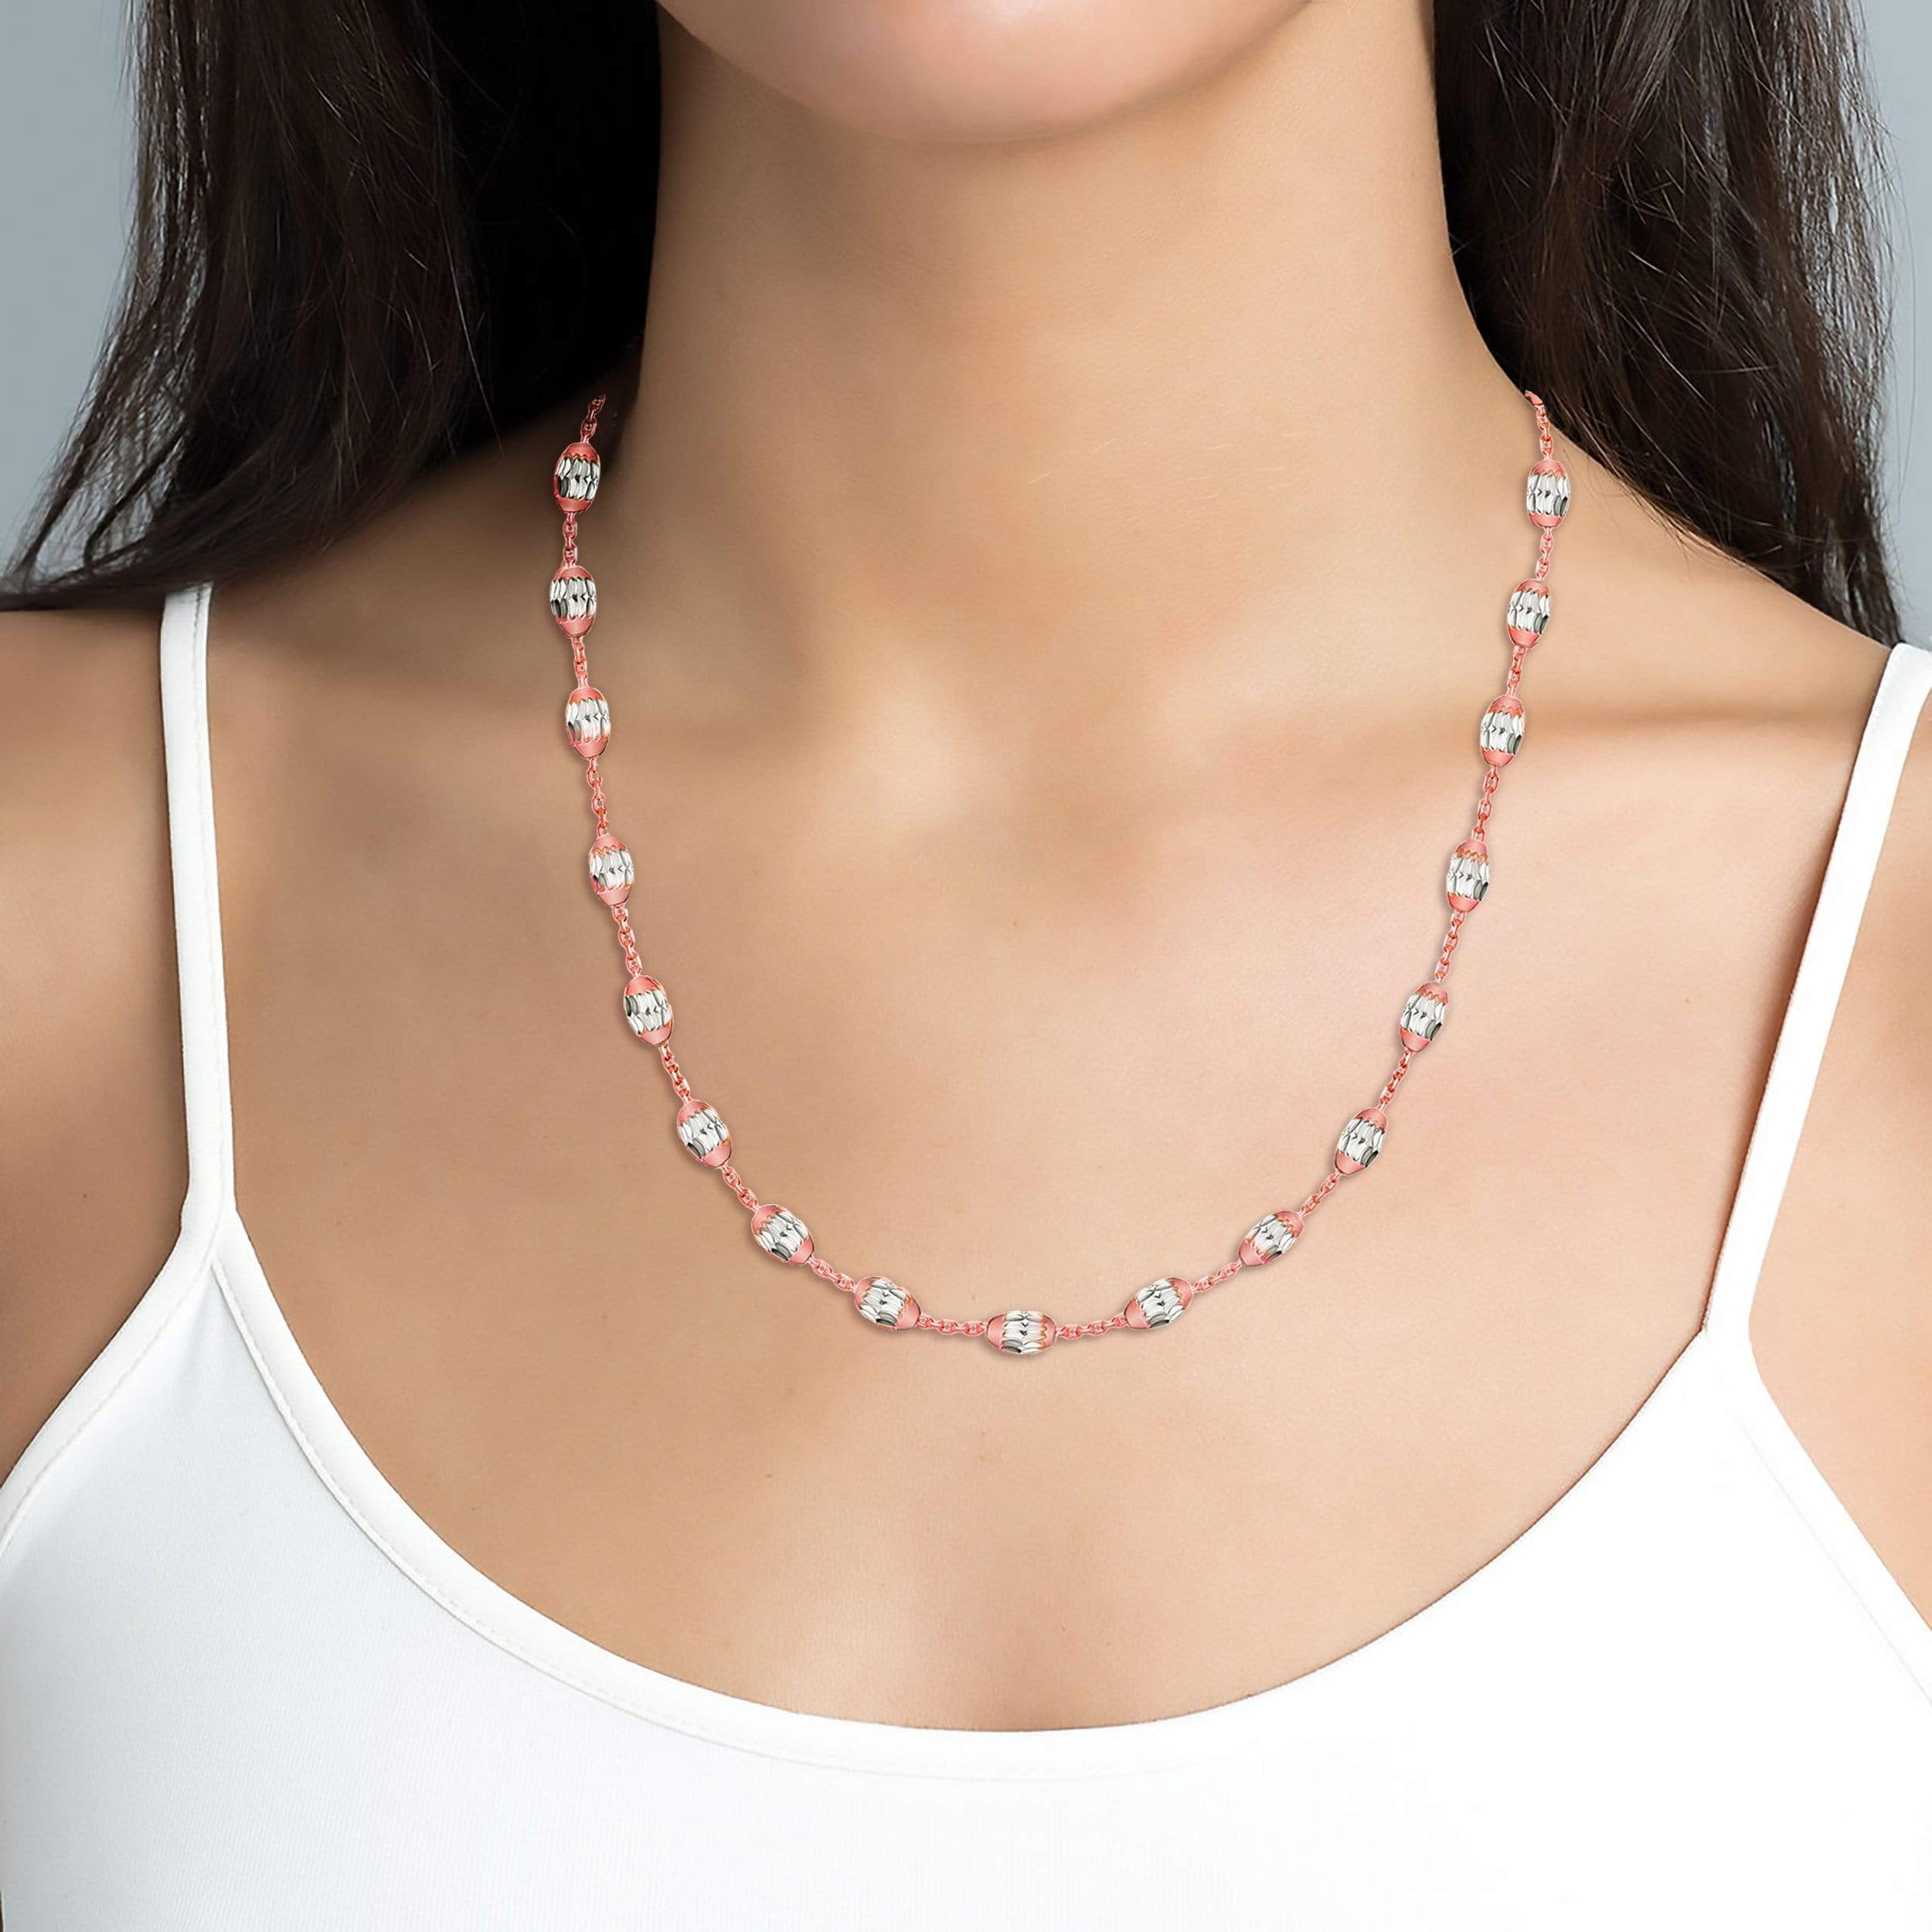 Lynora Jewellery Necklace 22" Geobeads Necklace Rose Gold Plate with Silver Beads